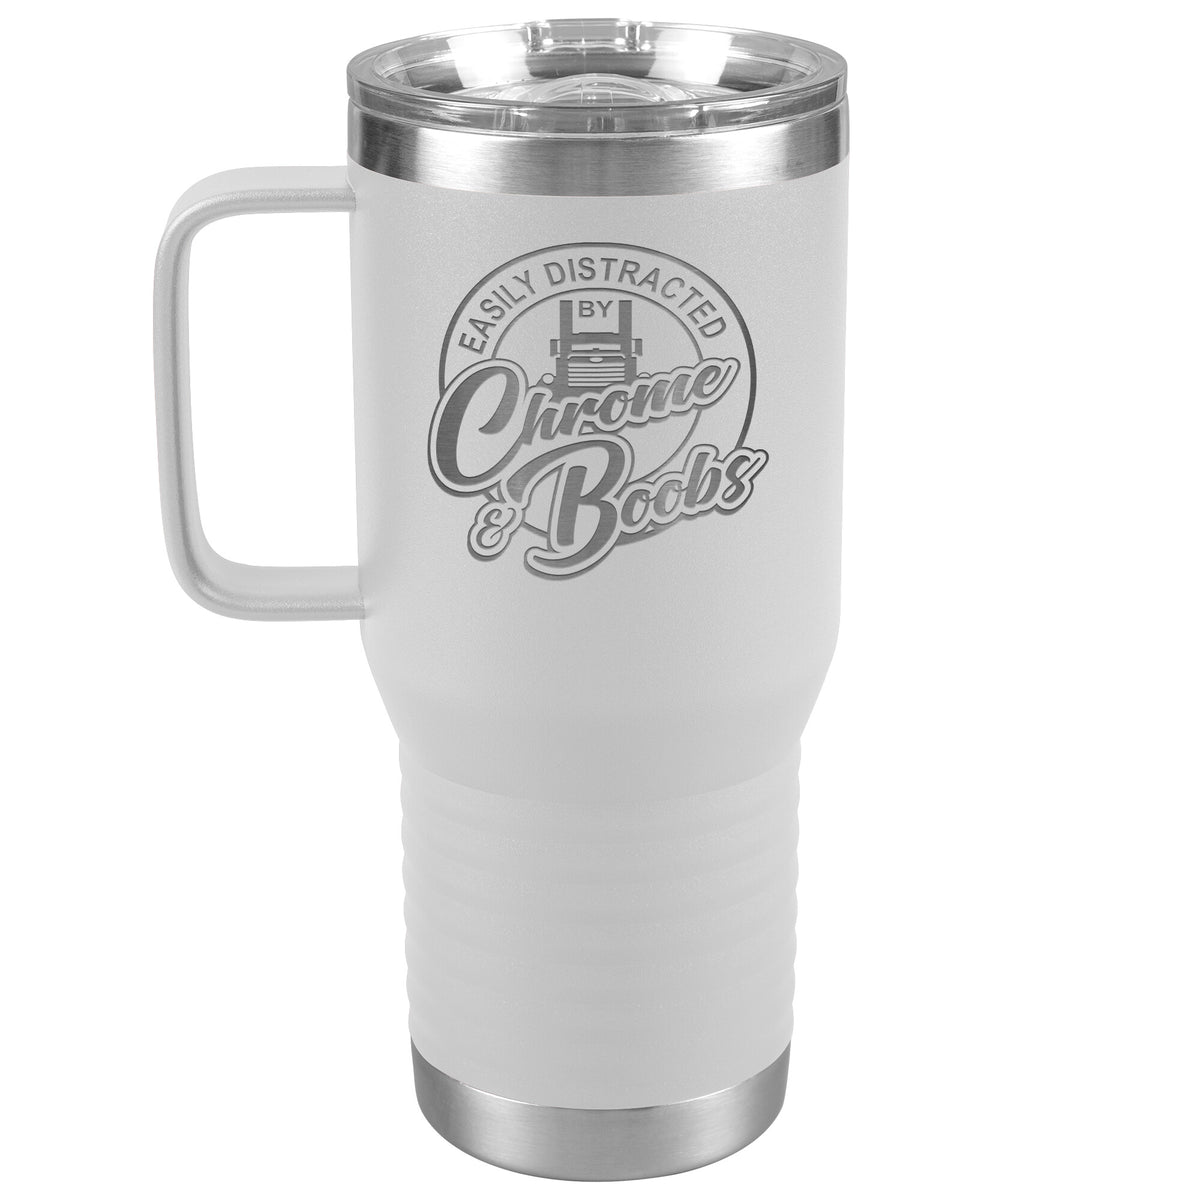 Easily Distracted by Chrome & Boobs - Pete - 20oz Handle Tumbler Free Shipping